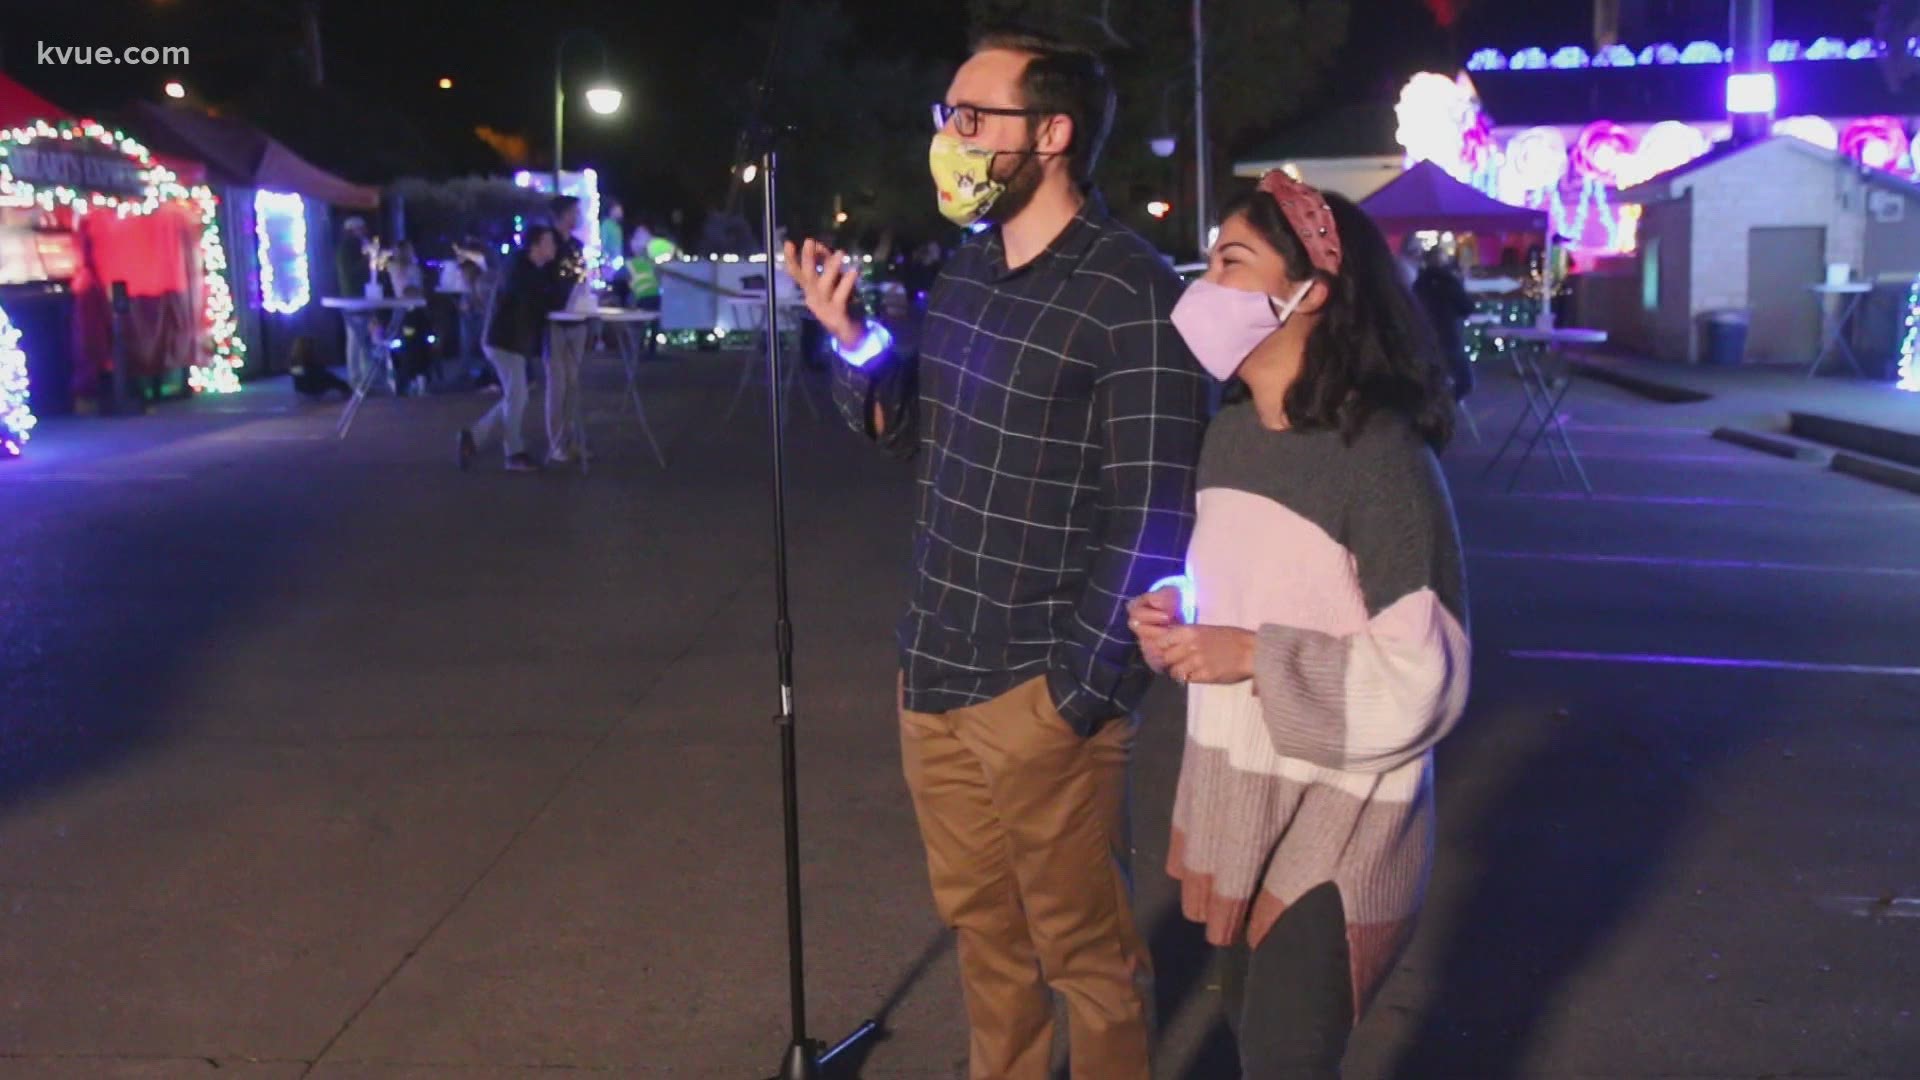 On Share Your Good News this week, Austinites at Mozart's light show focus on the positive from a tough year. Hank Cavagnaro reports.